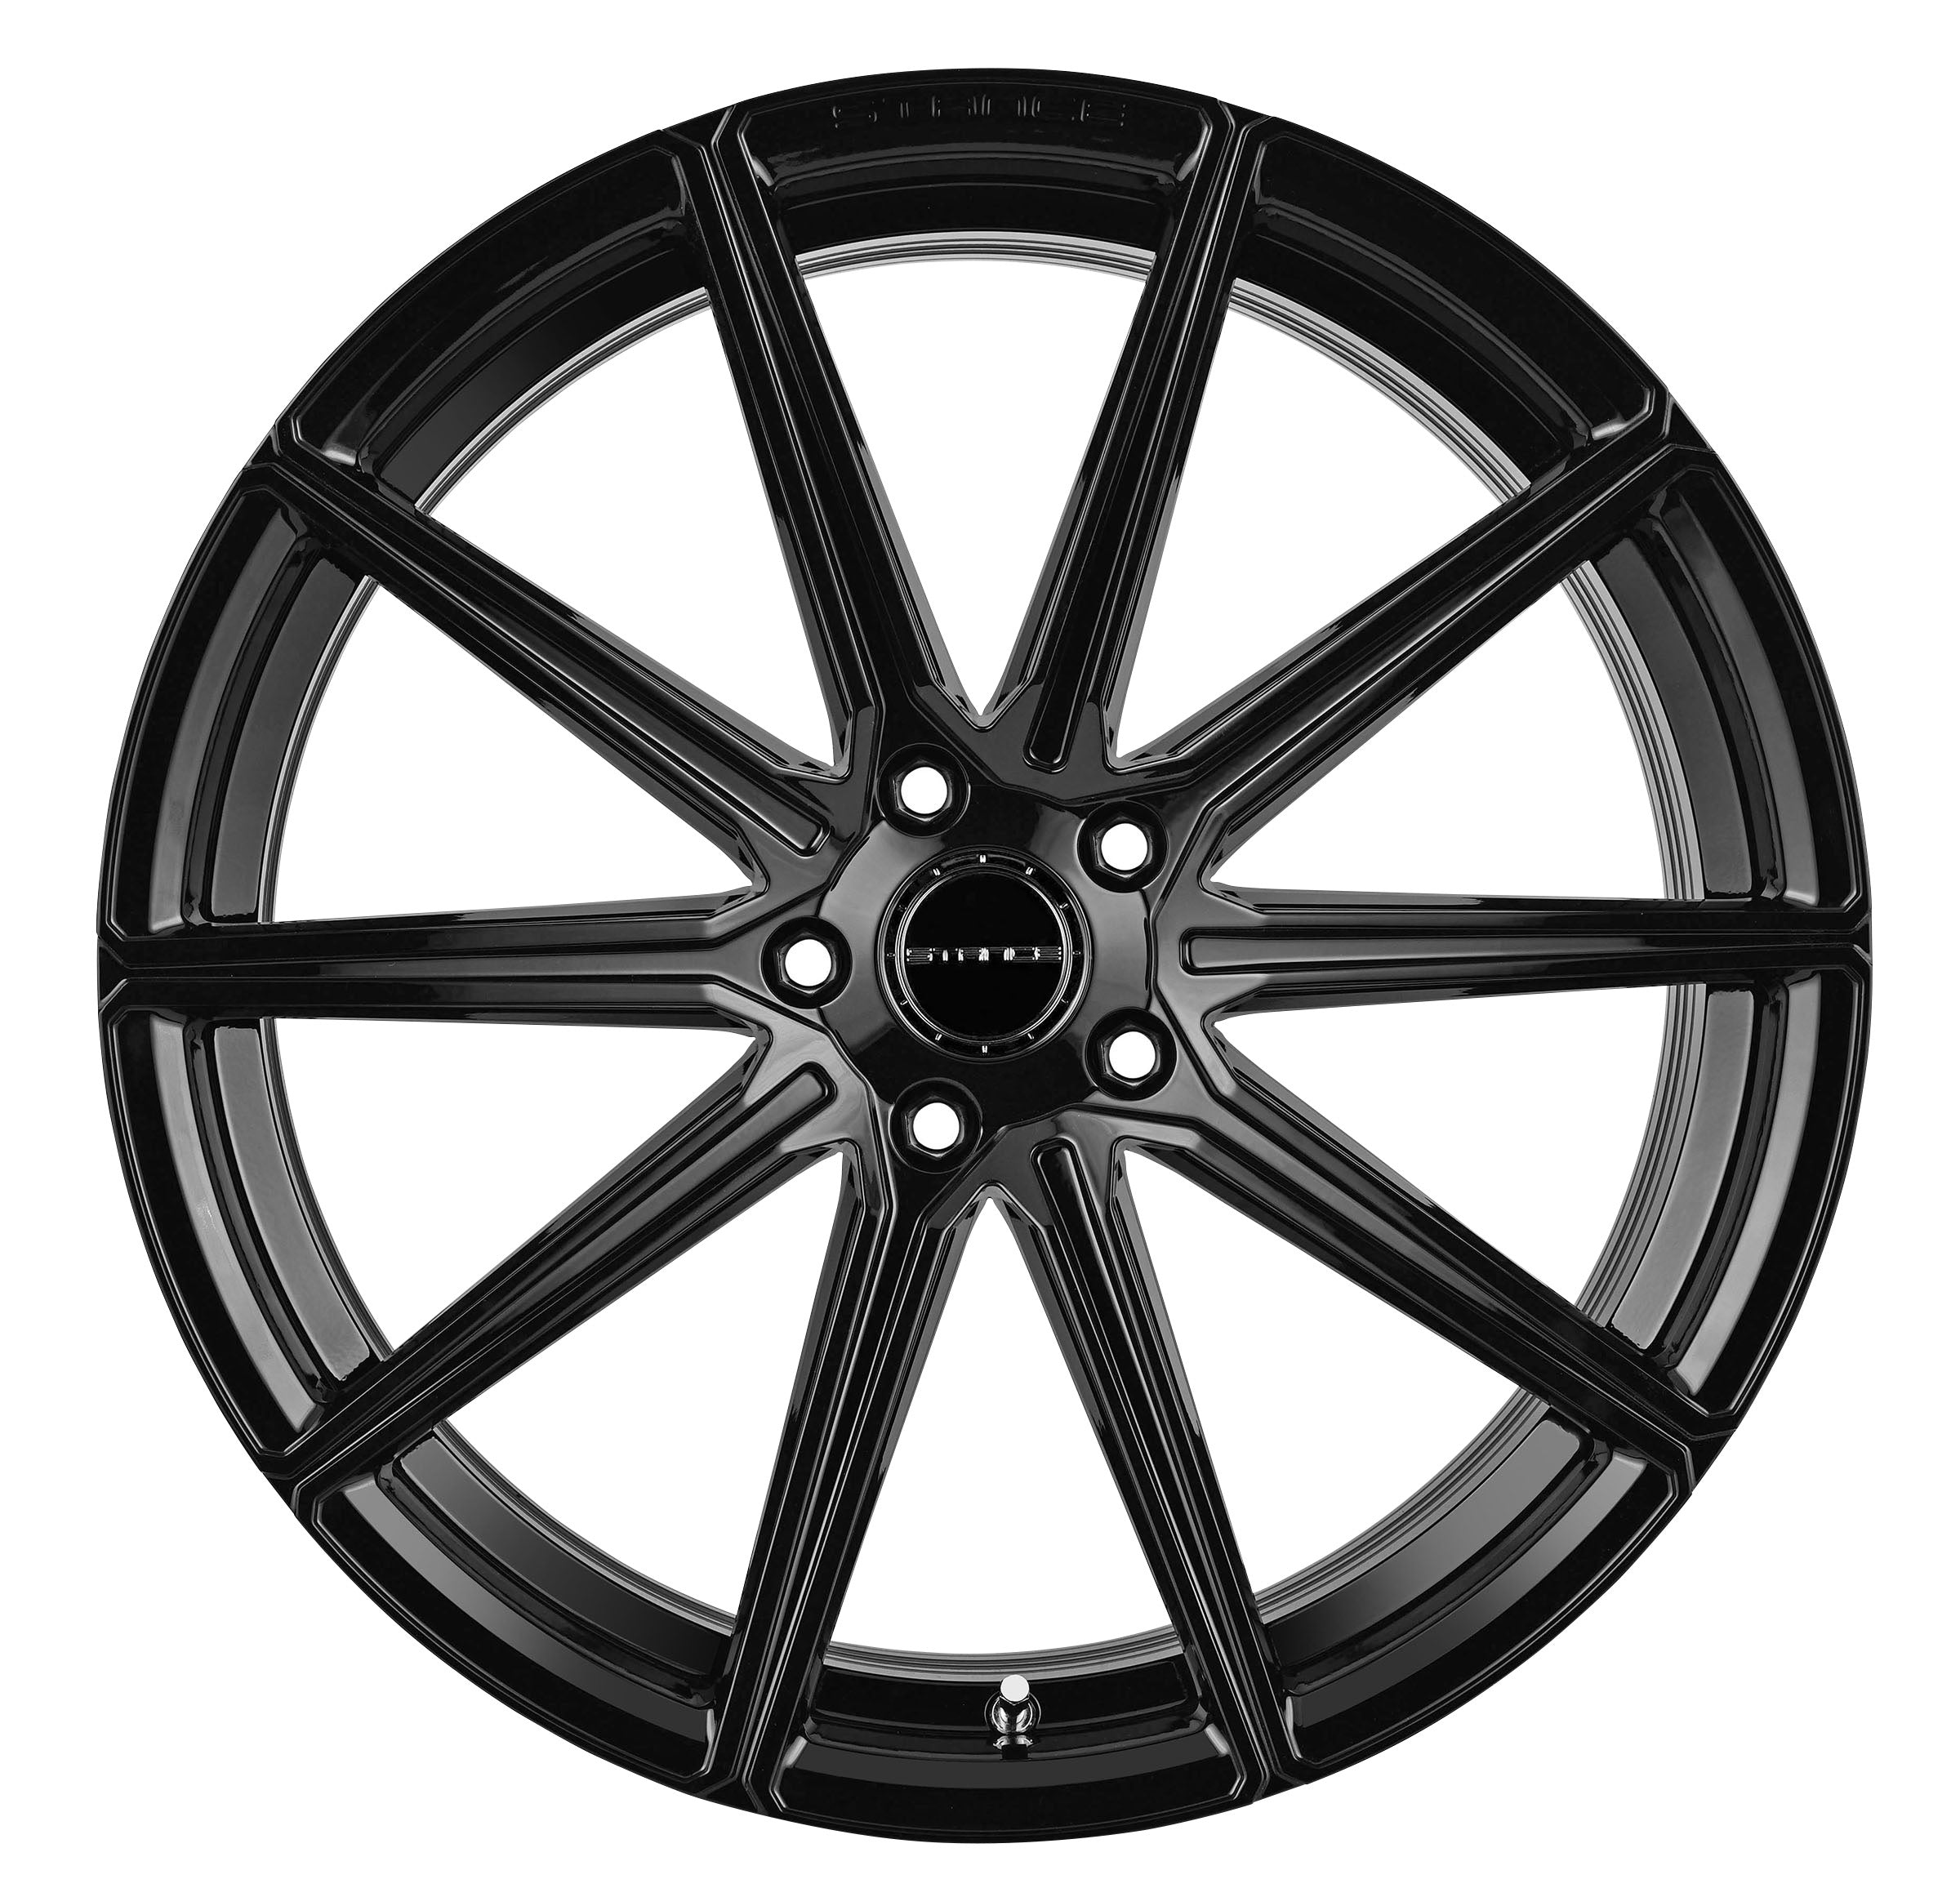 20” Stance SF09 Piano Black Concave Wheels - Set of 4 